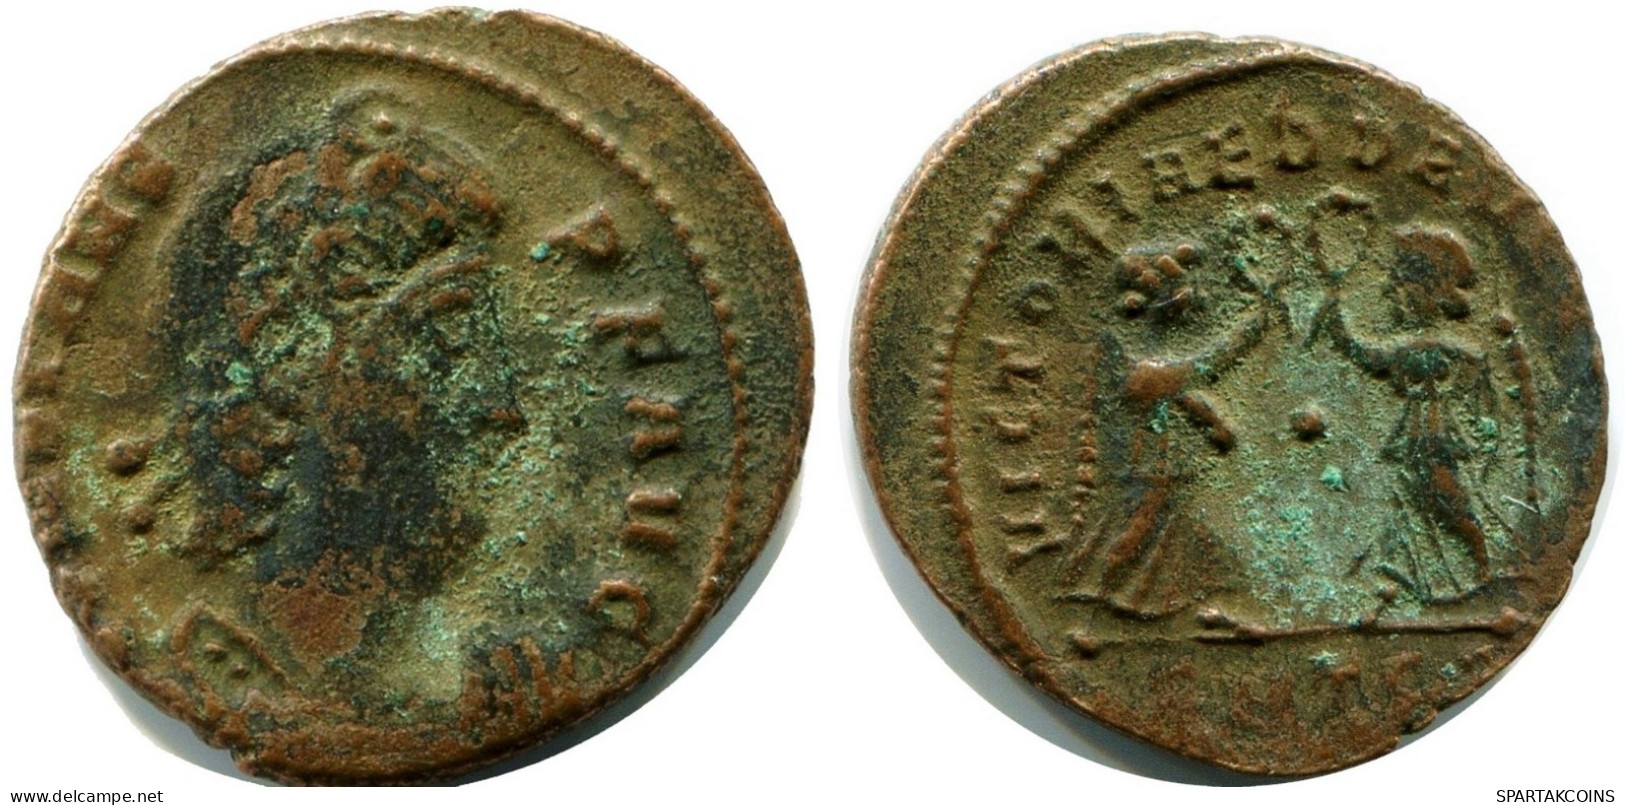 CONSTANS MINTED IN THESSALONICA FROM THE ROYAL ONTARIO MUSEUM #ANC11907.14.U.A - The Christian Empire (307 AD To 363 AD)